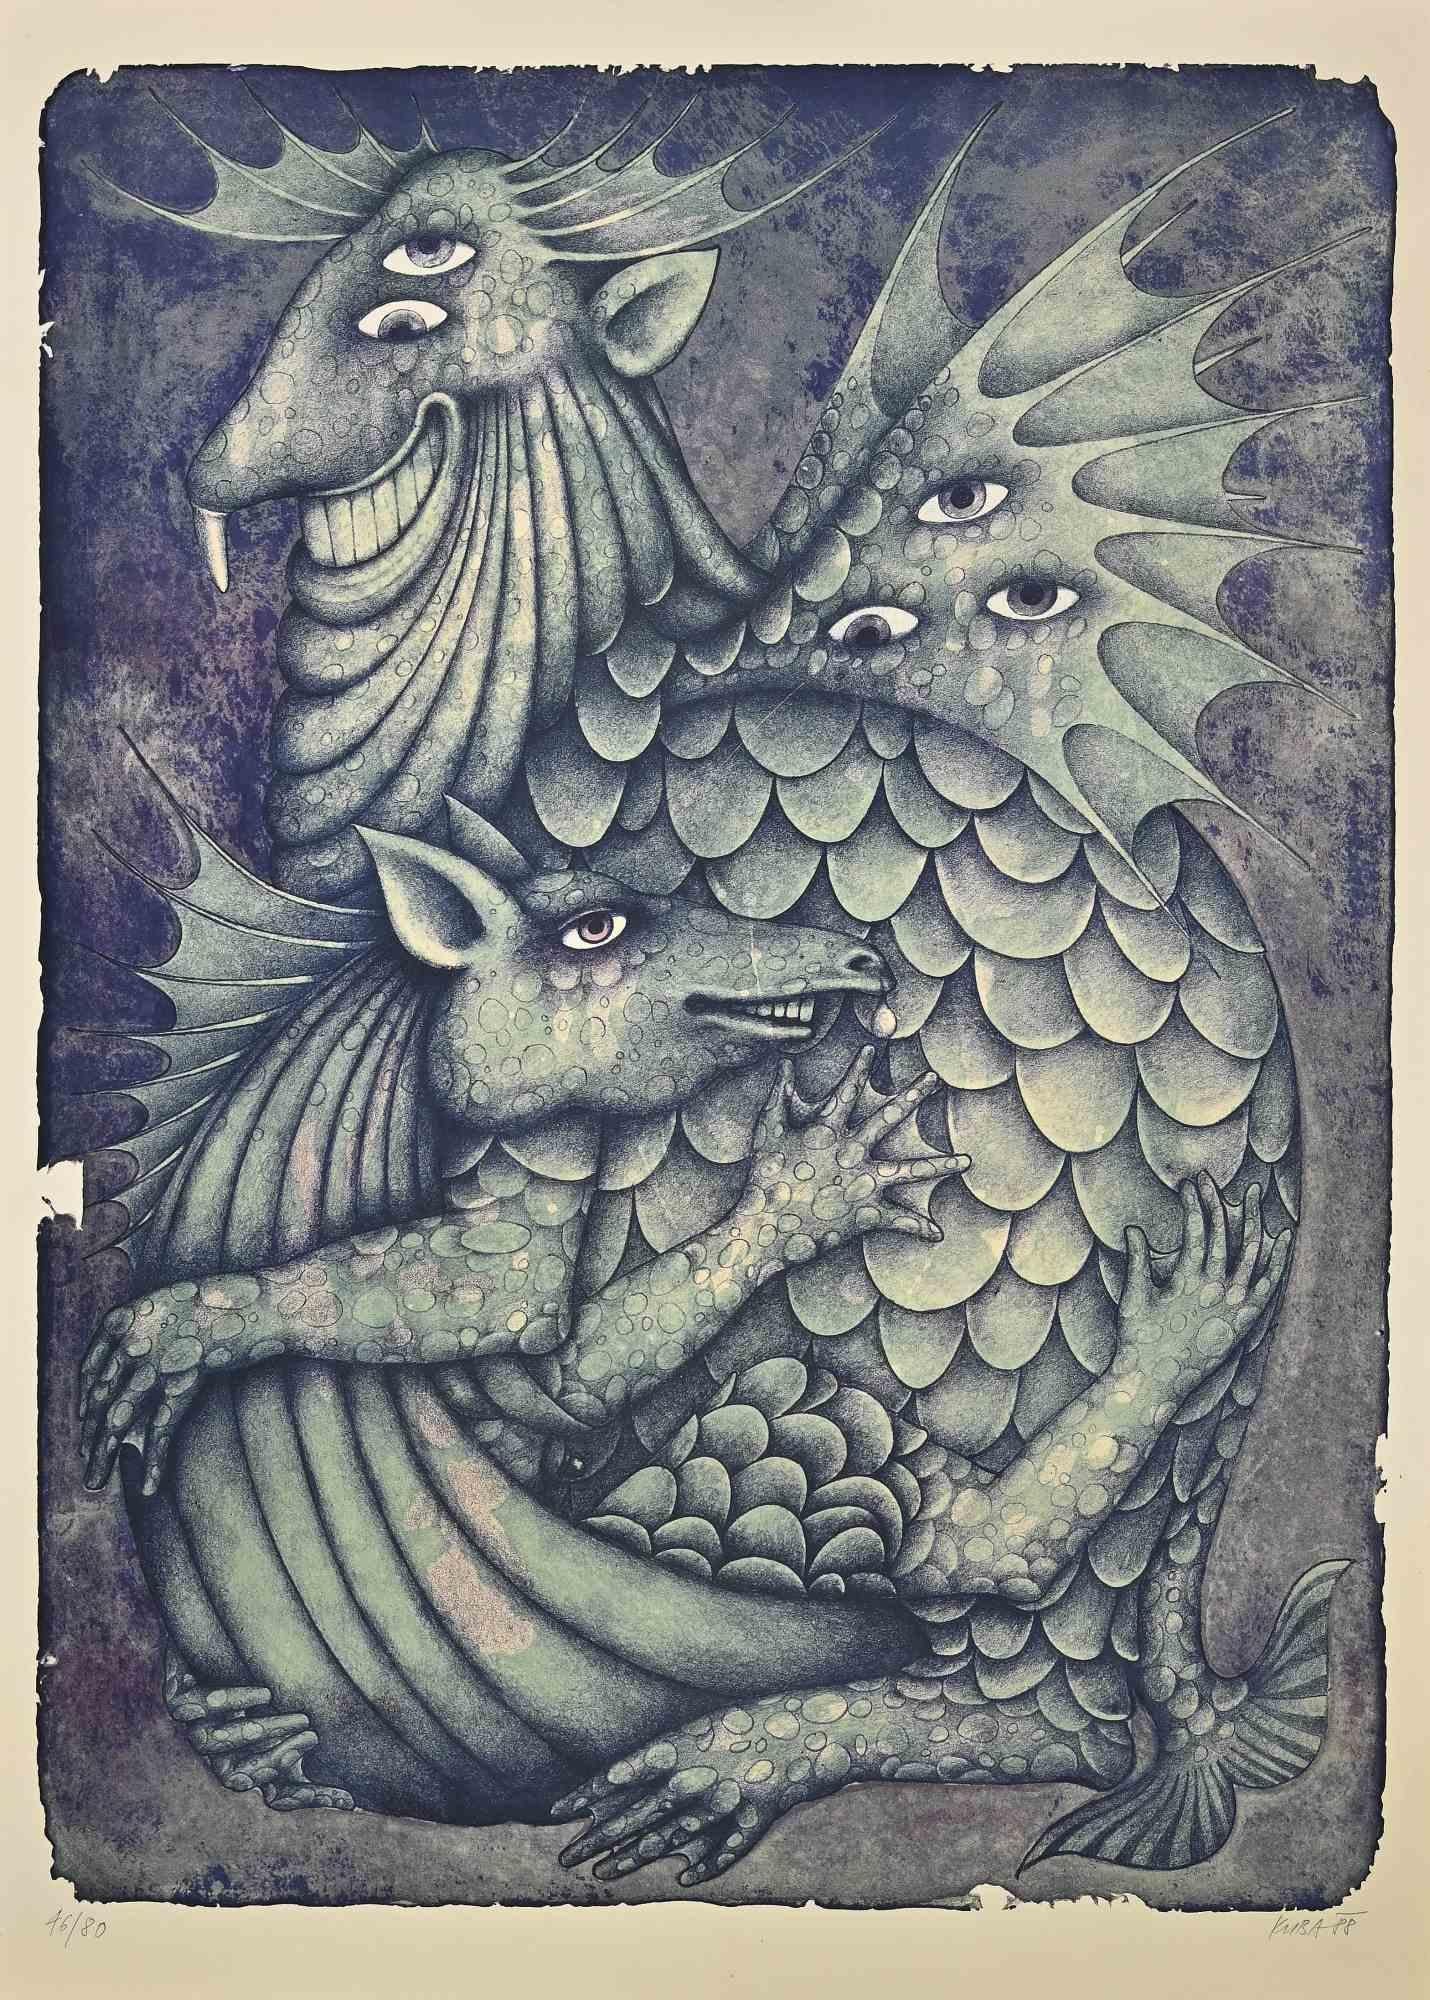 Devil is a Lithograph realized by Kuba in 1988.

Hand-signed by the artist on the lower.

Numbered, Limited edition of 46/80 prints.

Good conditions.

The artwork with great imagination illustrated green dragons with scales, through harmonious